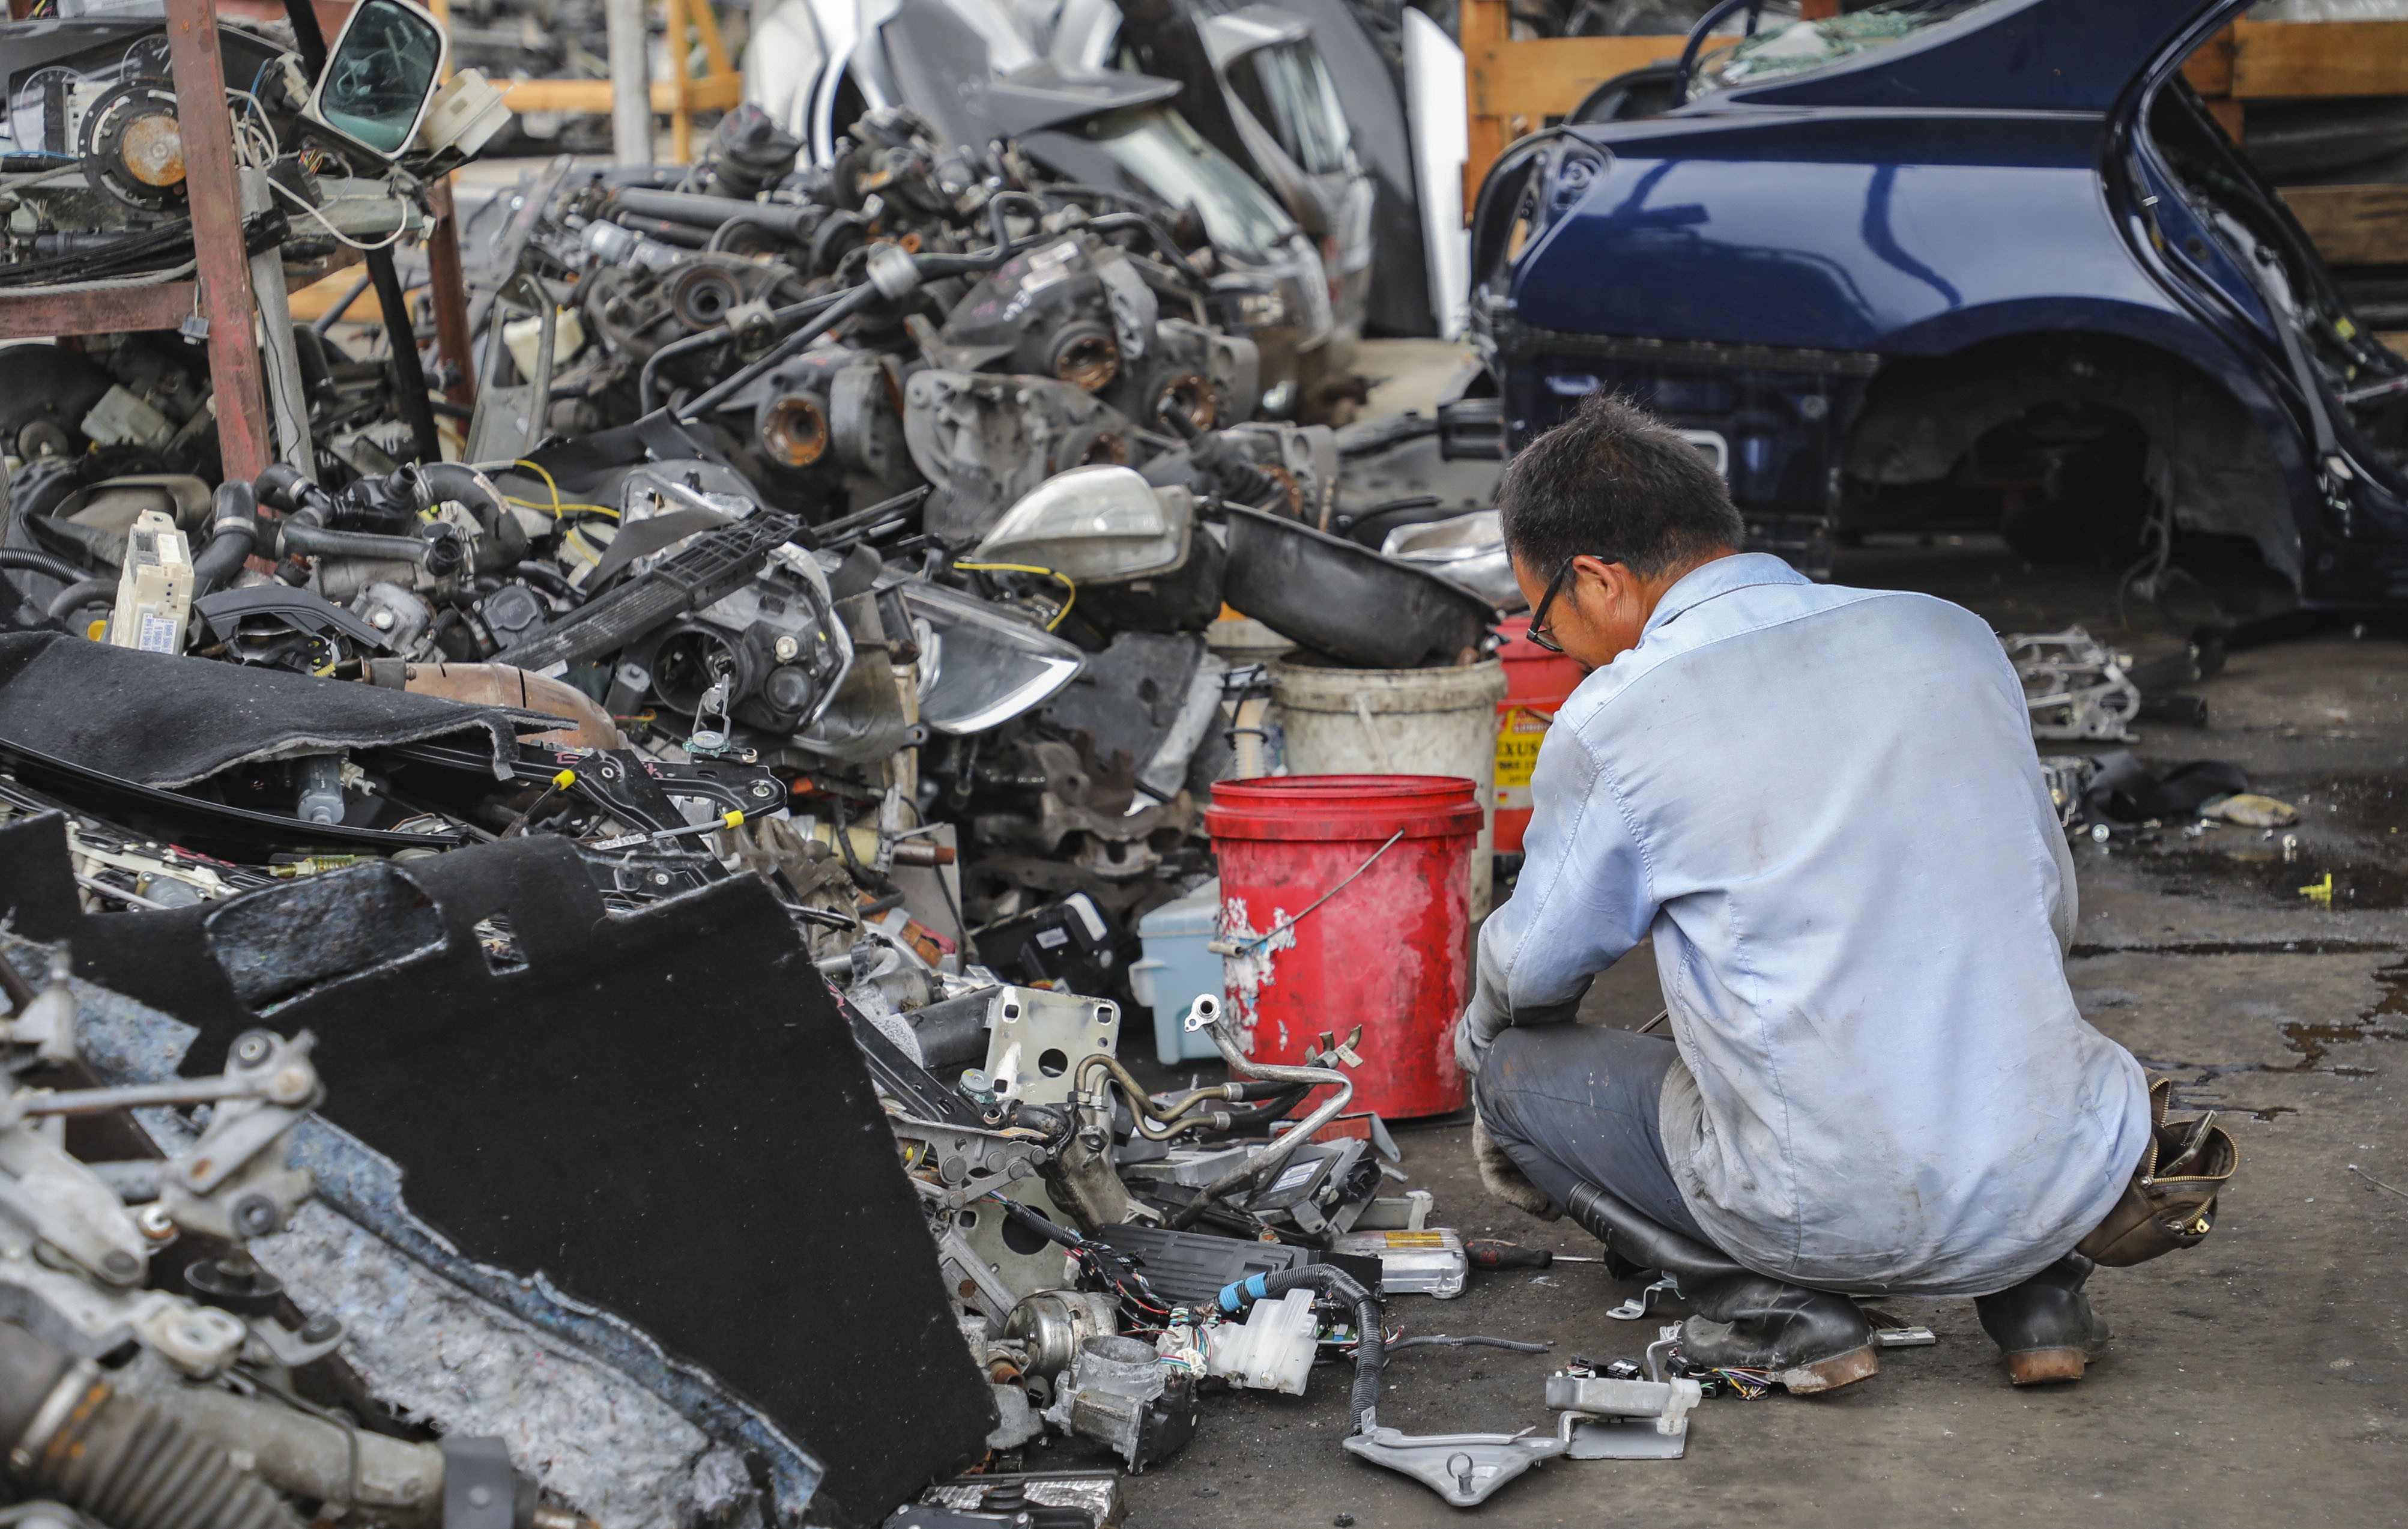 A man works at a recycling yard for vehicle parts operating on a brownfield site in Wang Toi Shan in Yuen Long in May 2018. The proposal to redevelop brownfield sites in the New Territories received strong public support in the Task Force on Land Supply’s public engagement exercise, but resettling existing businesses will be not be easy. Photo: Edward Wong